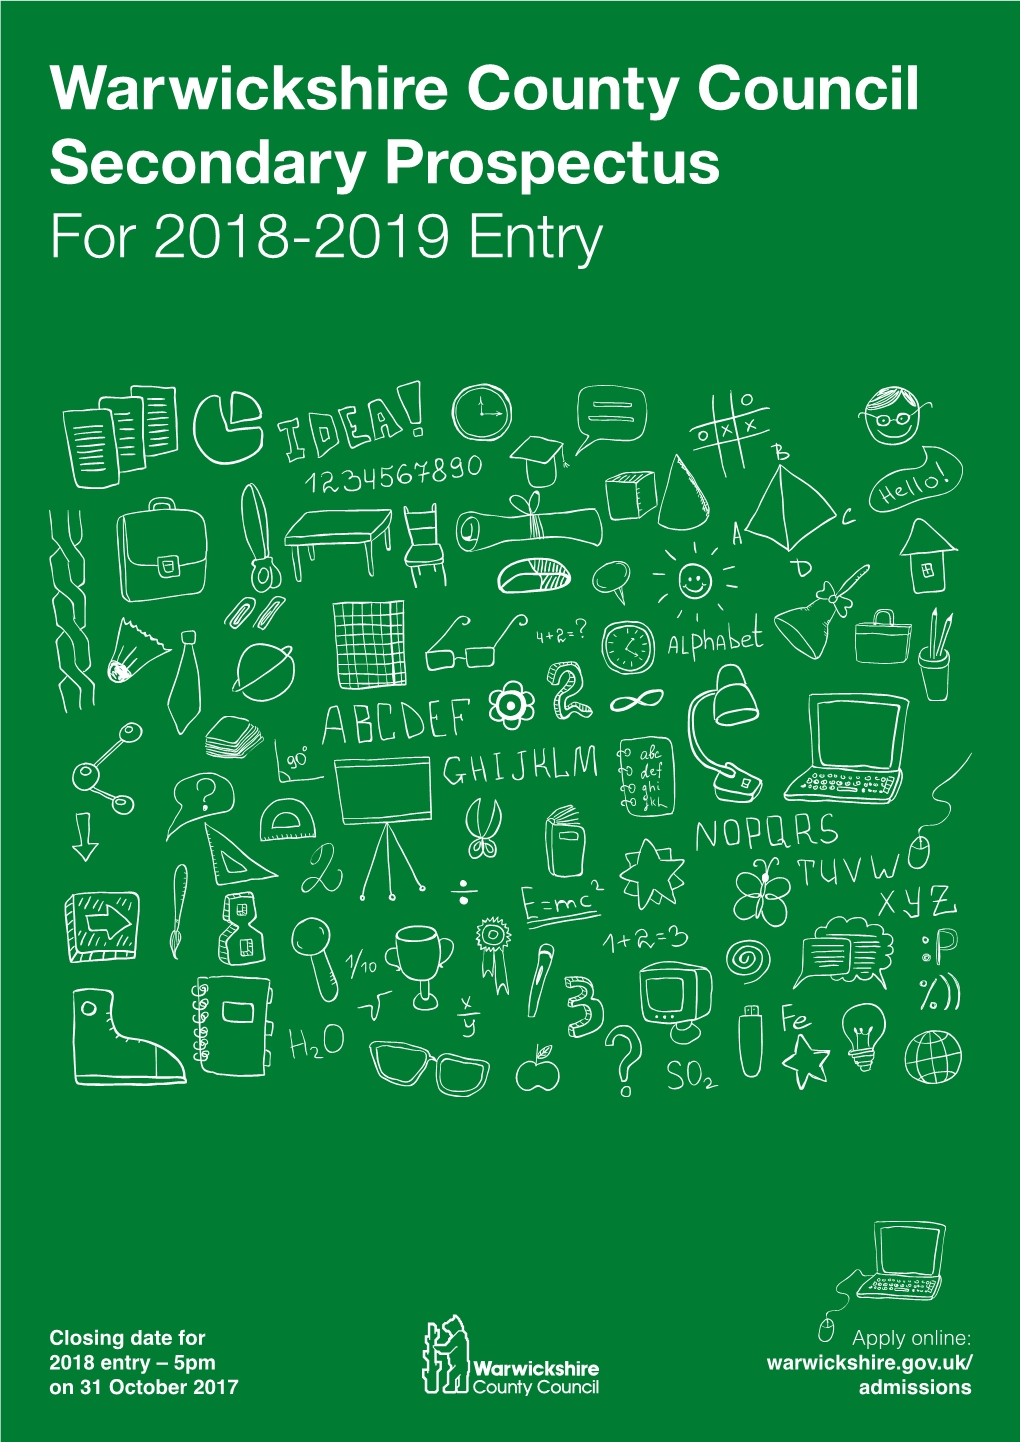 Warwickshire County Council Secondary Prospectus for 2018-2019 Entry